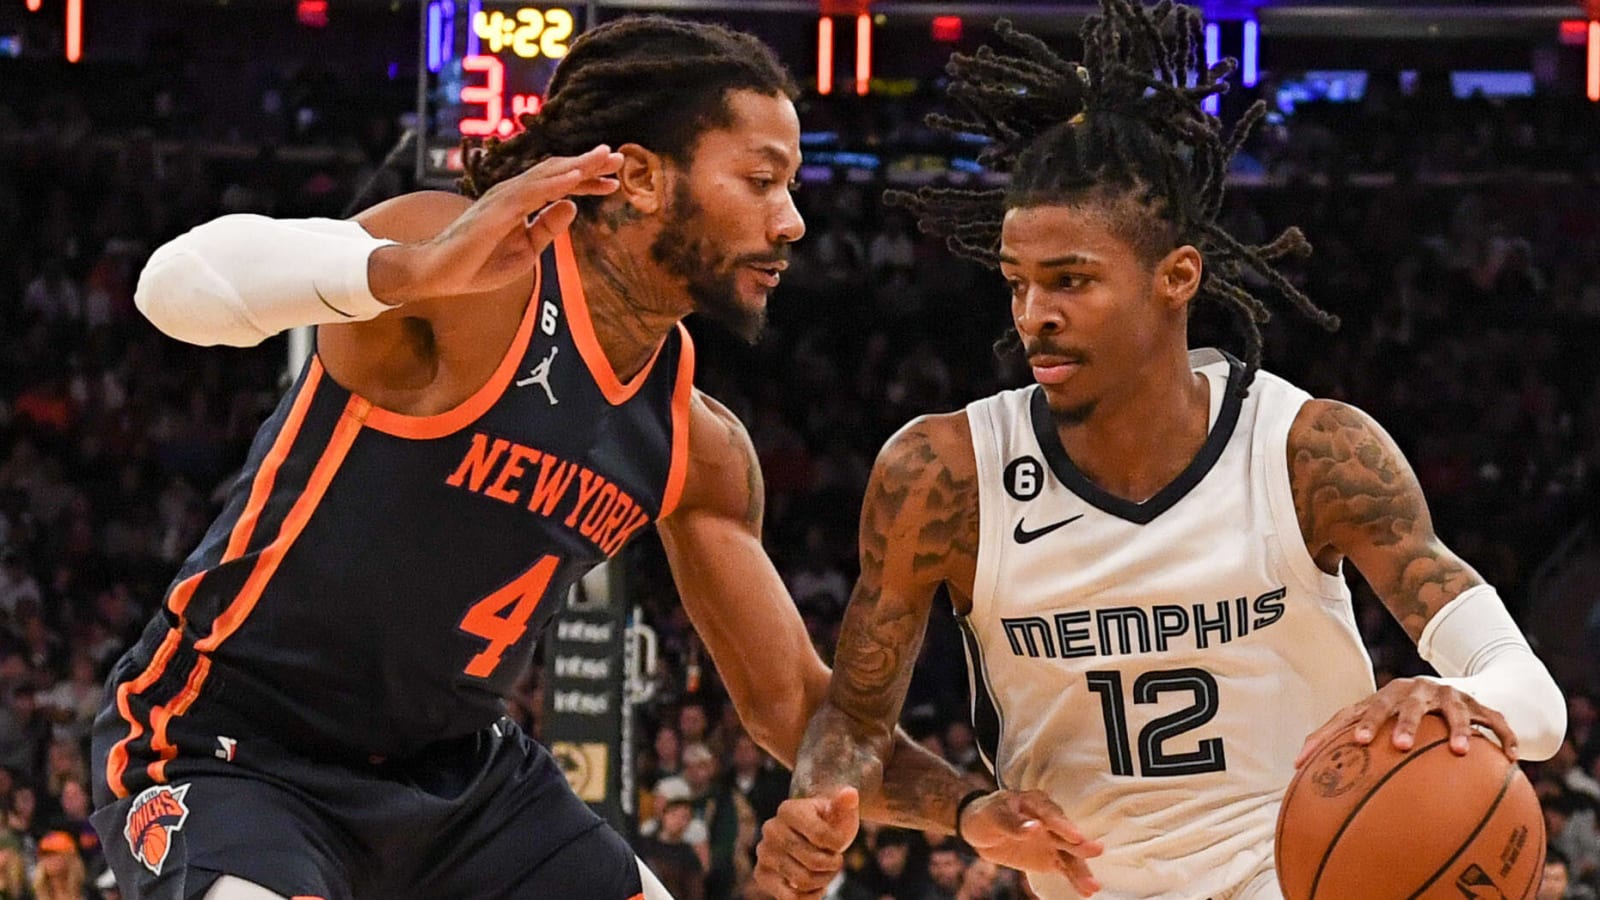 Ja Morant credits Derrick Rose as an influence to his game